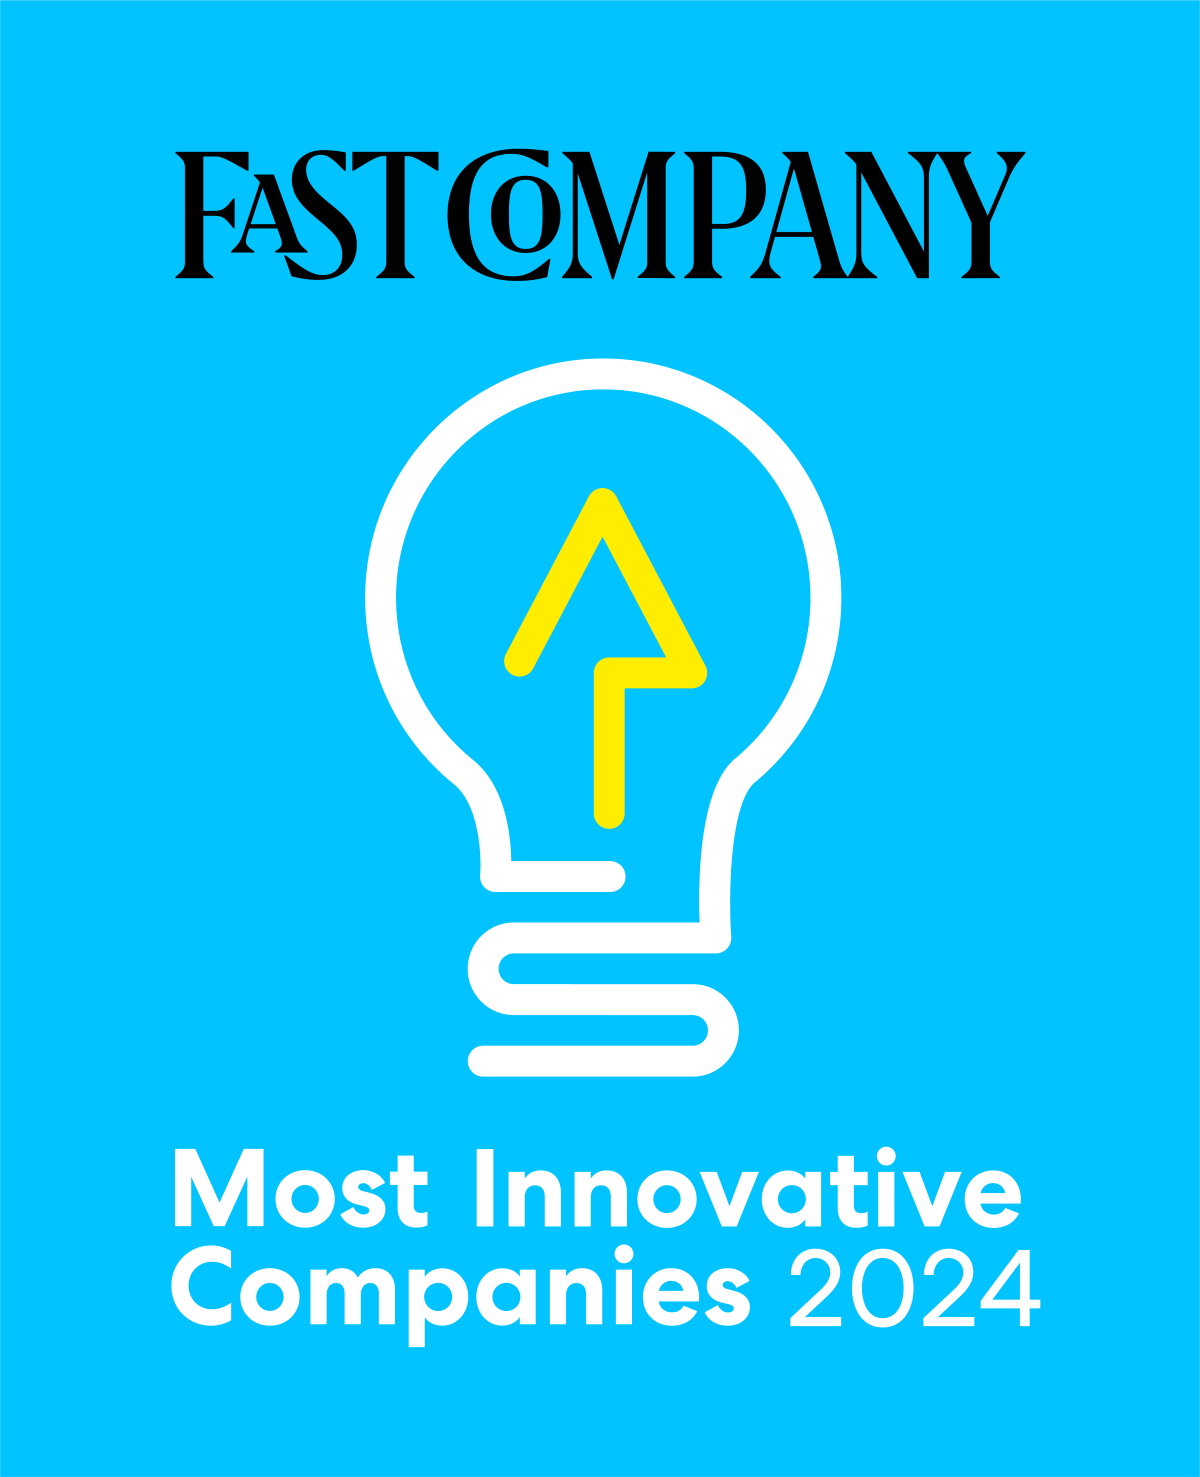 Fast Company Names Connexus Energy One of the Most Innovative Companies of 2024 Photo